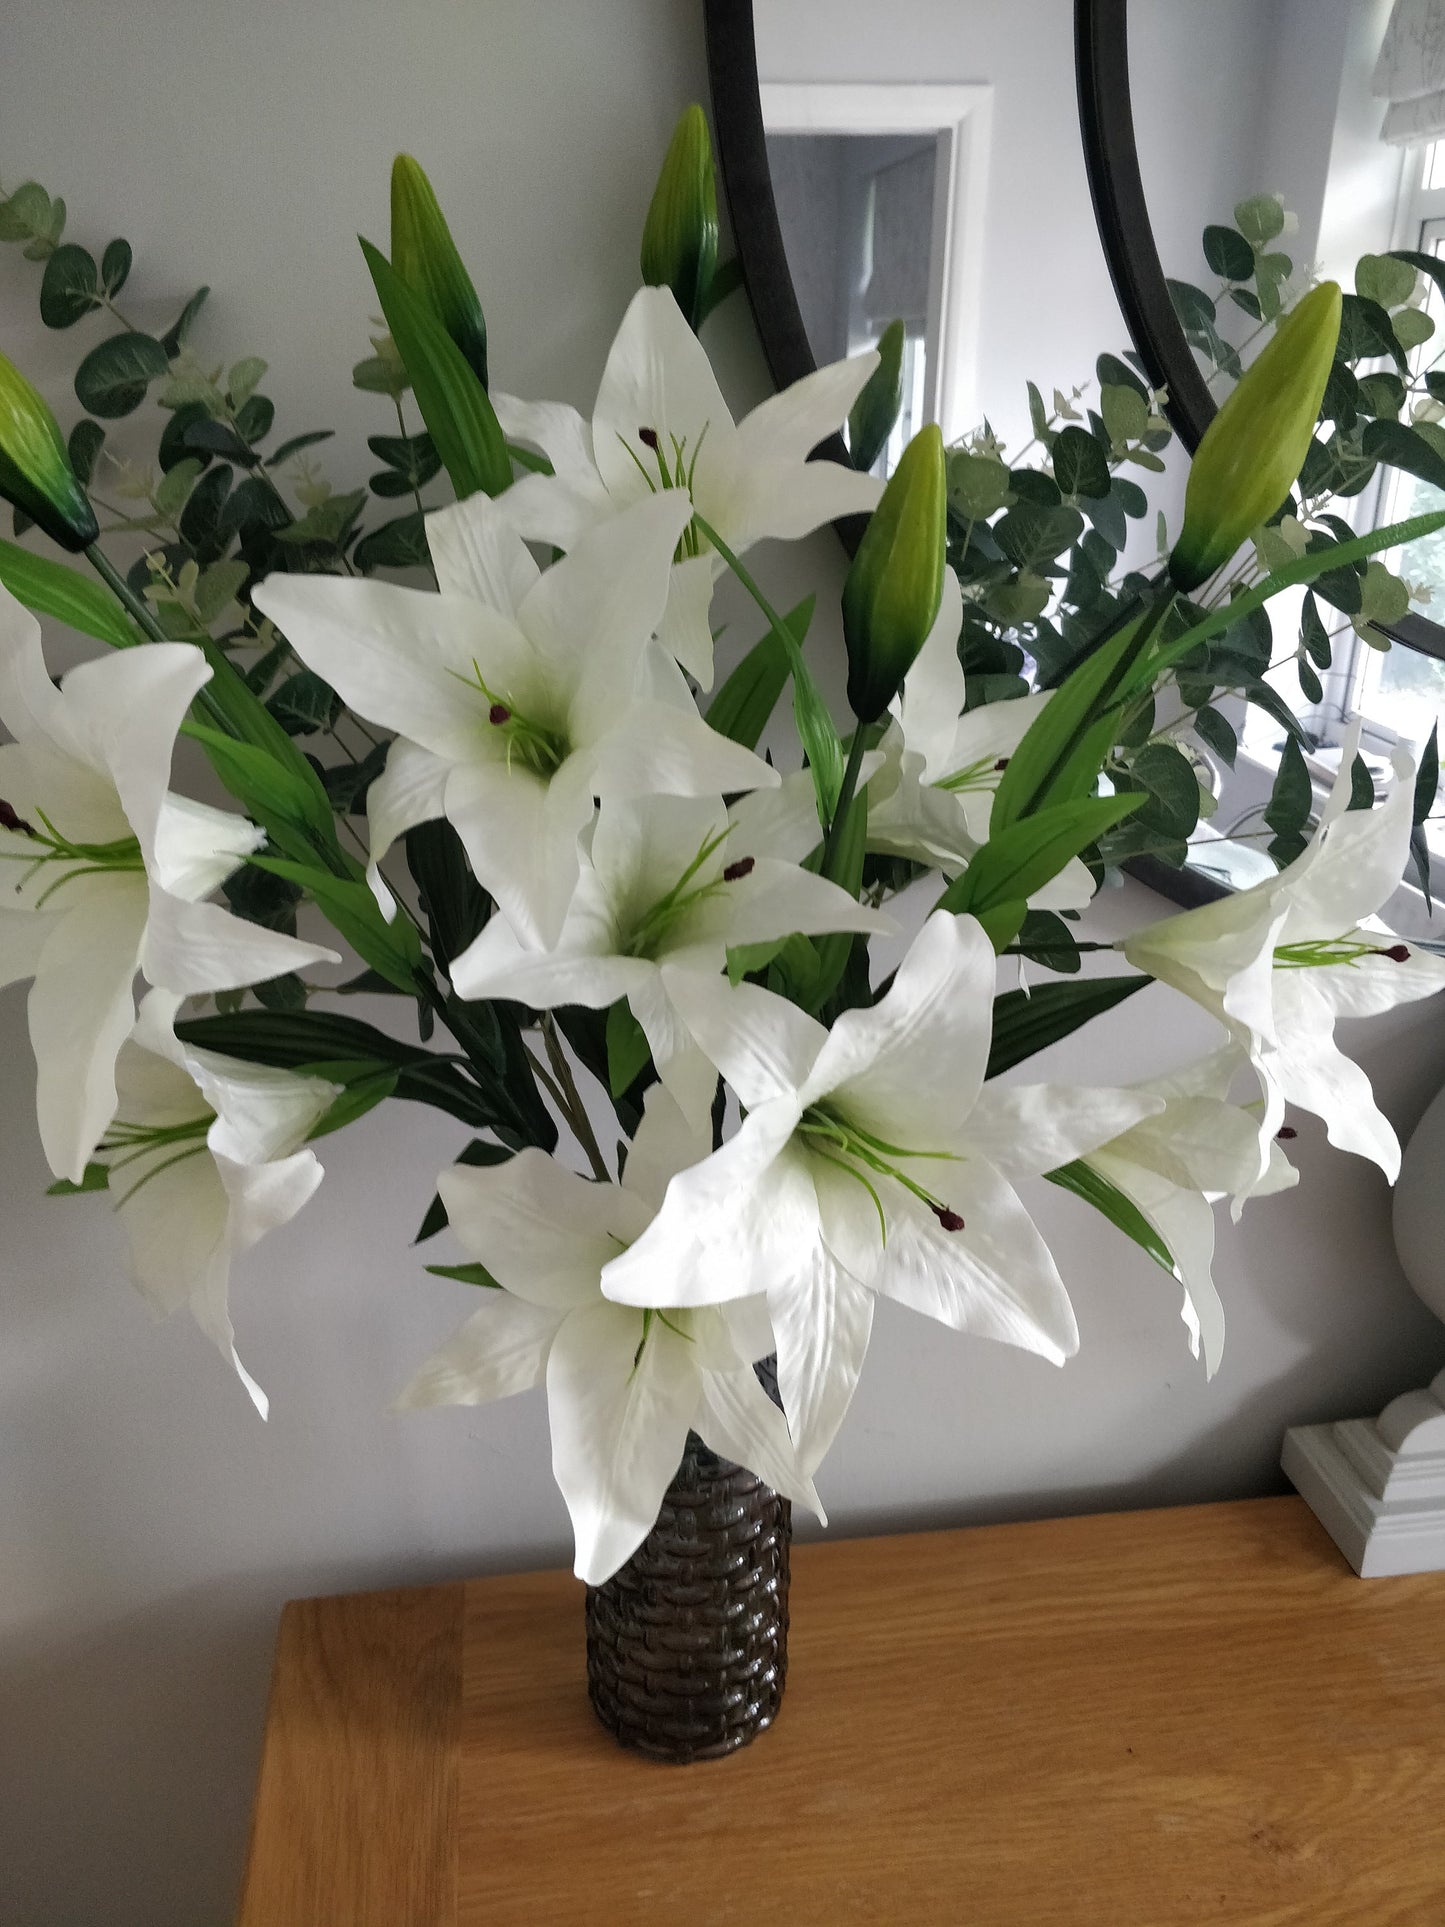 Lily and Eucalyptus Flower Arrangement With Glass Vase 70cm Height